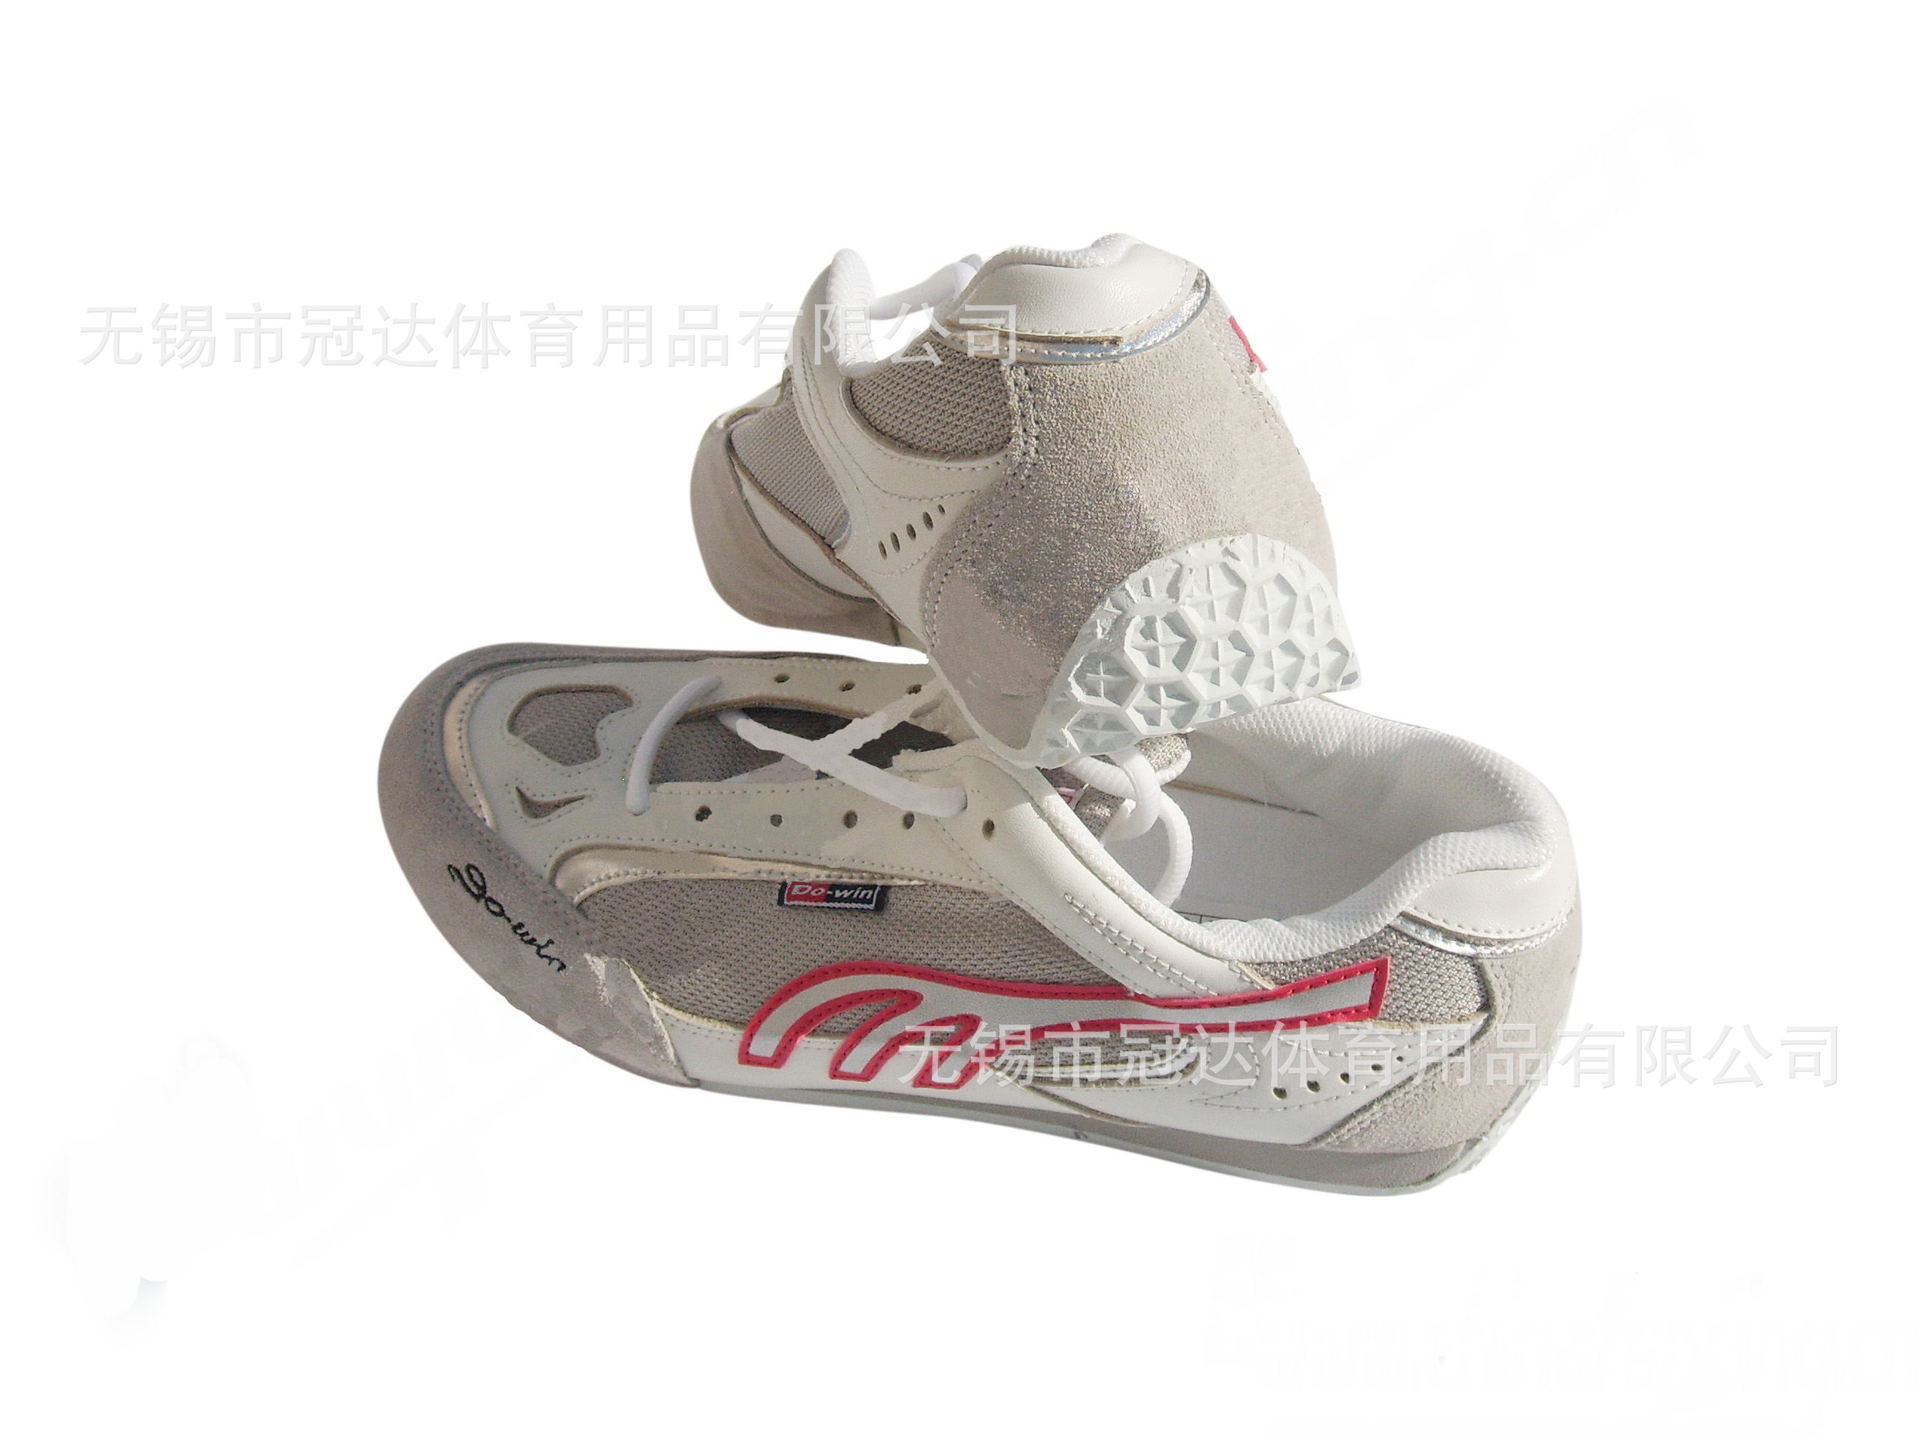 Do-Win Fencing Shoes